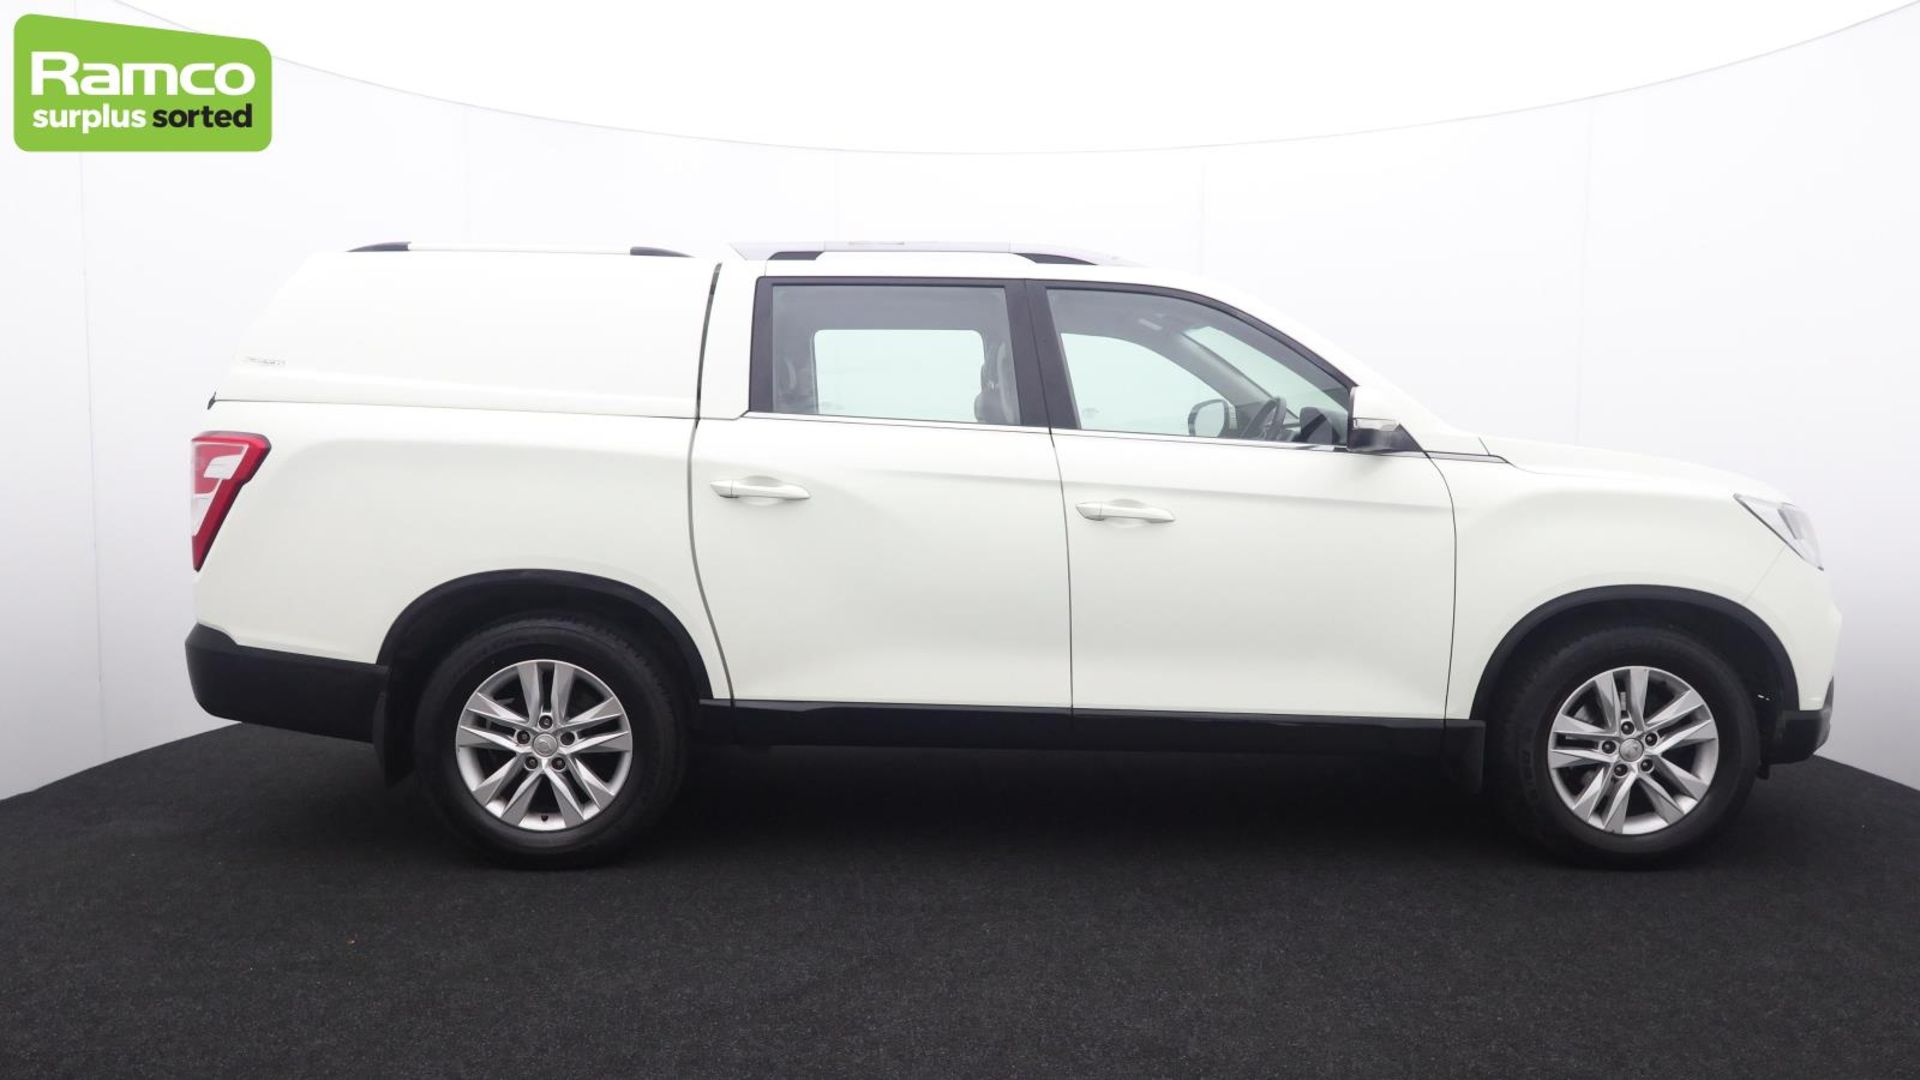 SsangYong Musso Rebel Auto RA19 NPP 2.2L Pick Up Euro 6 - Image 4 of 45